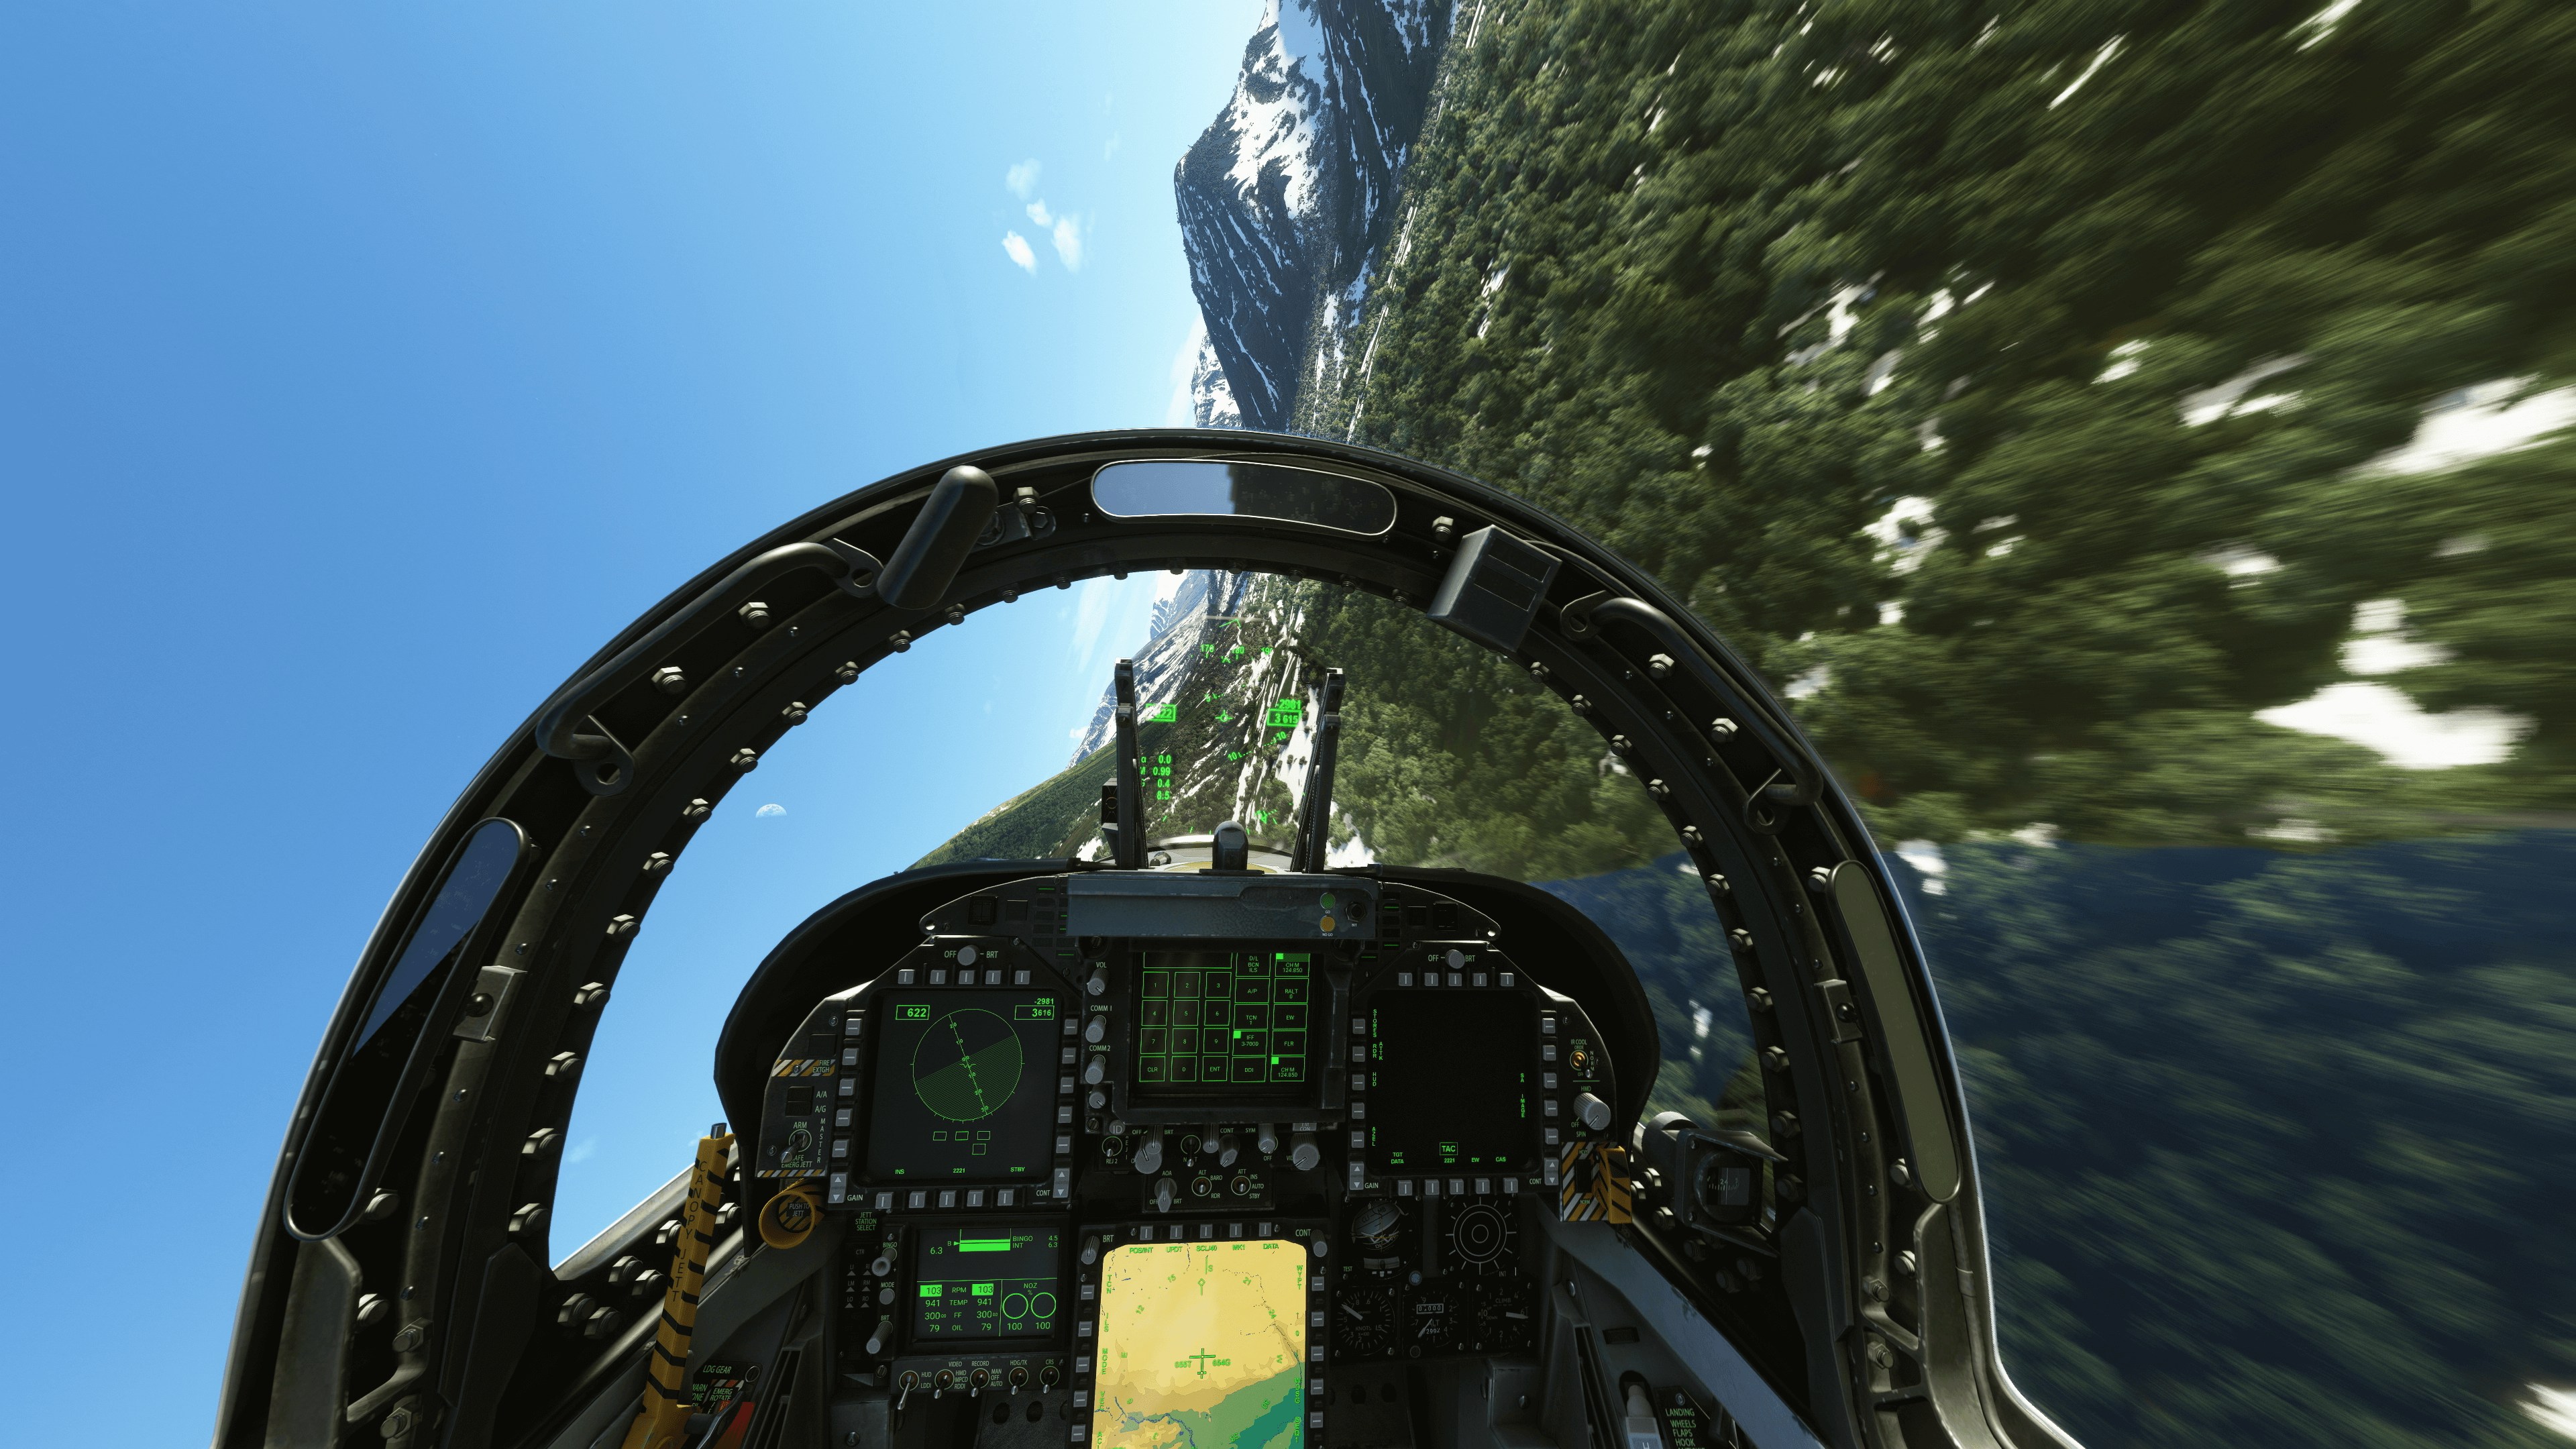 Top Gun: Maverick Expansion for MSFS Now Available